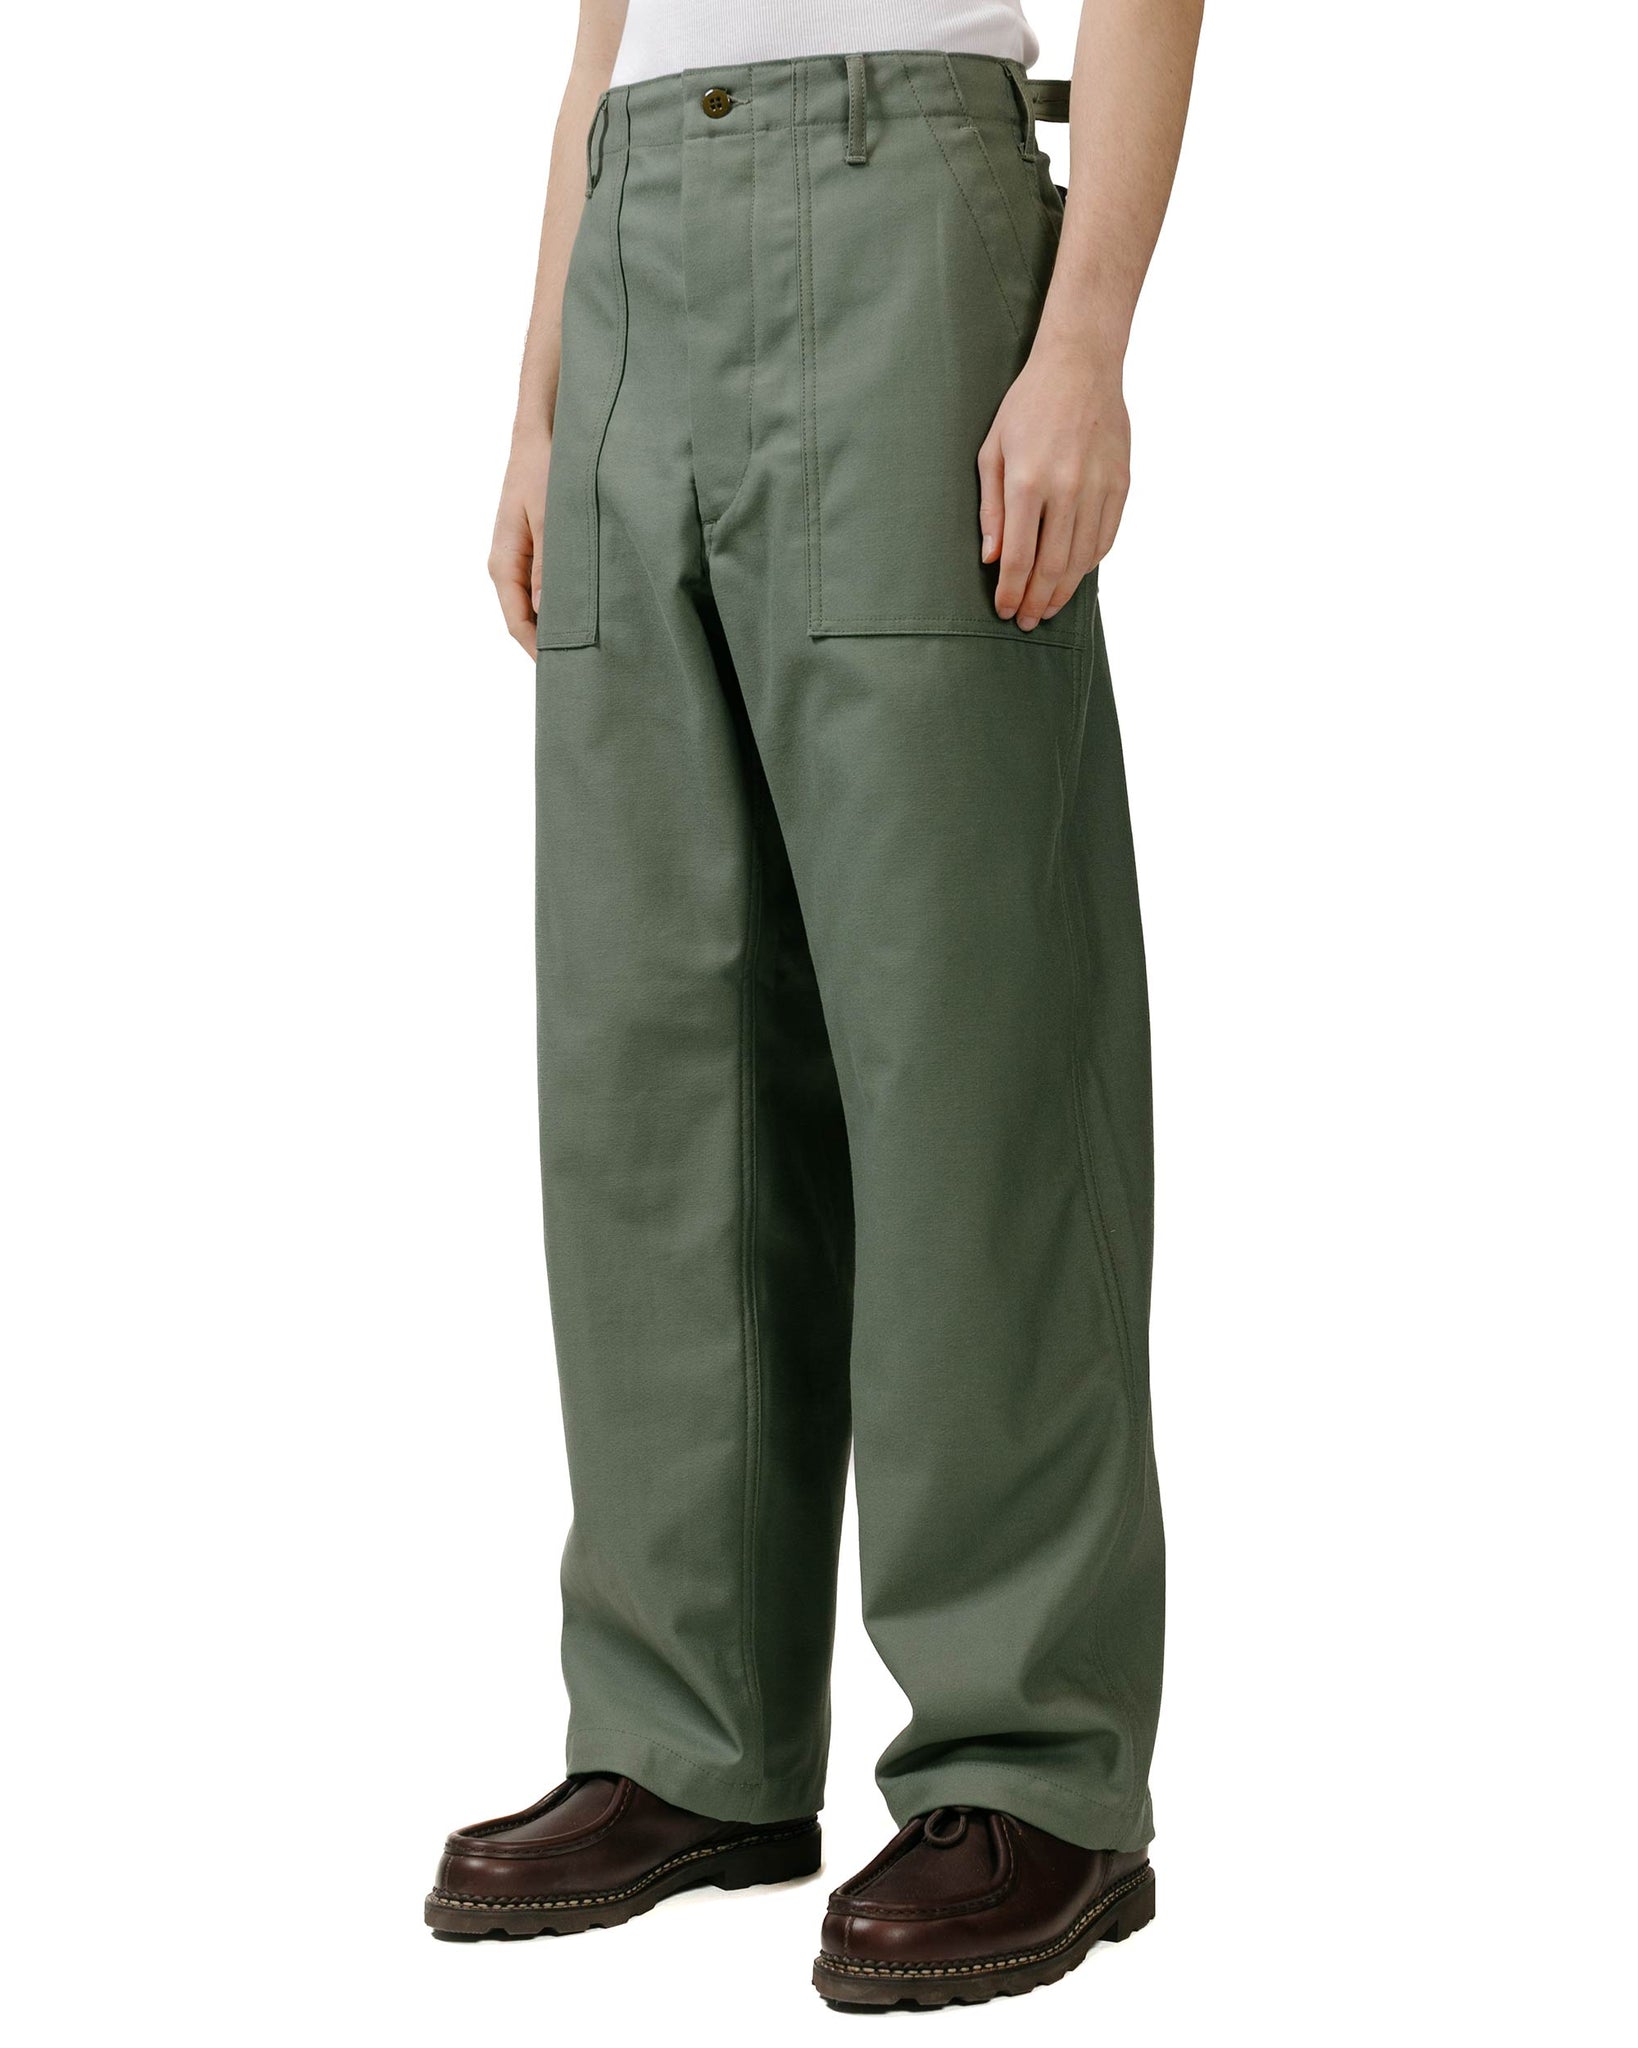 Engineered Garments Workaday Fatigue Pant Olive Cotton Reverse Sateen model front